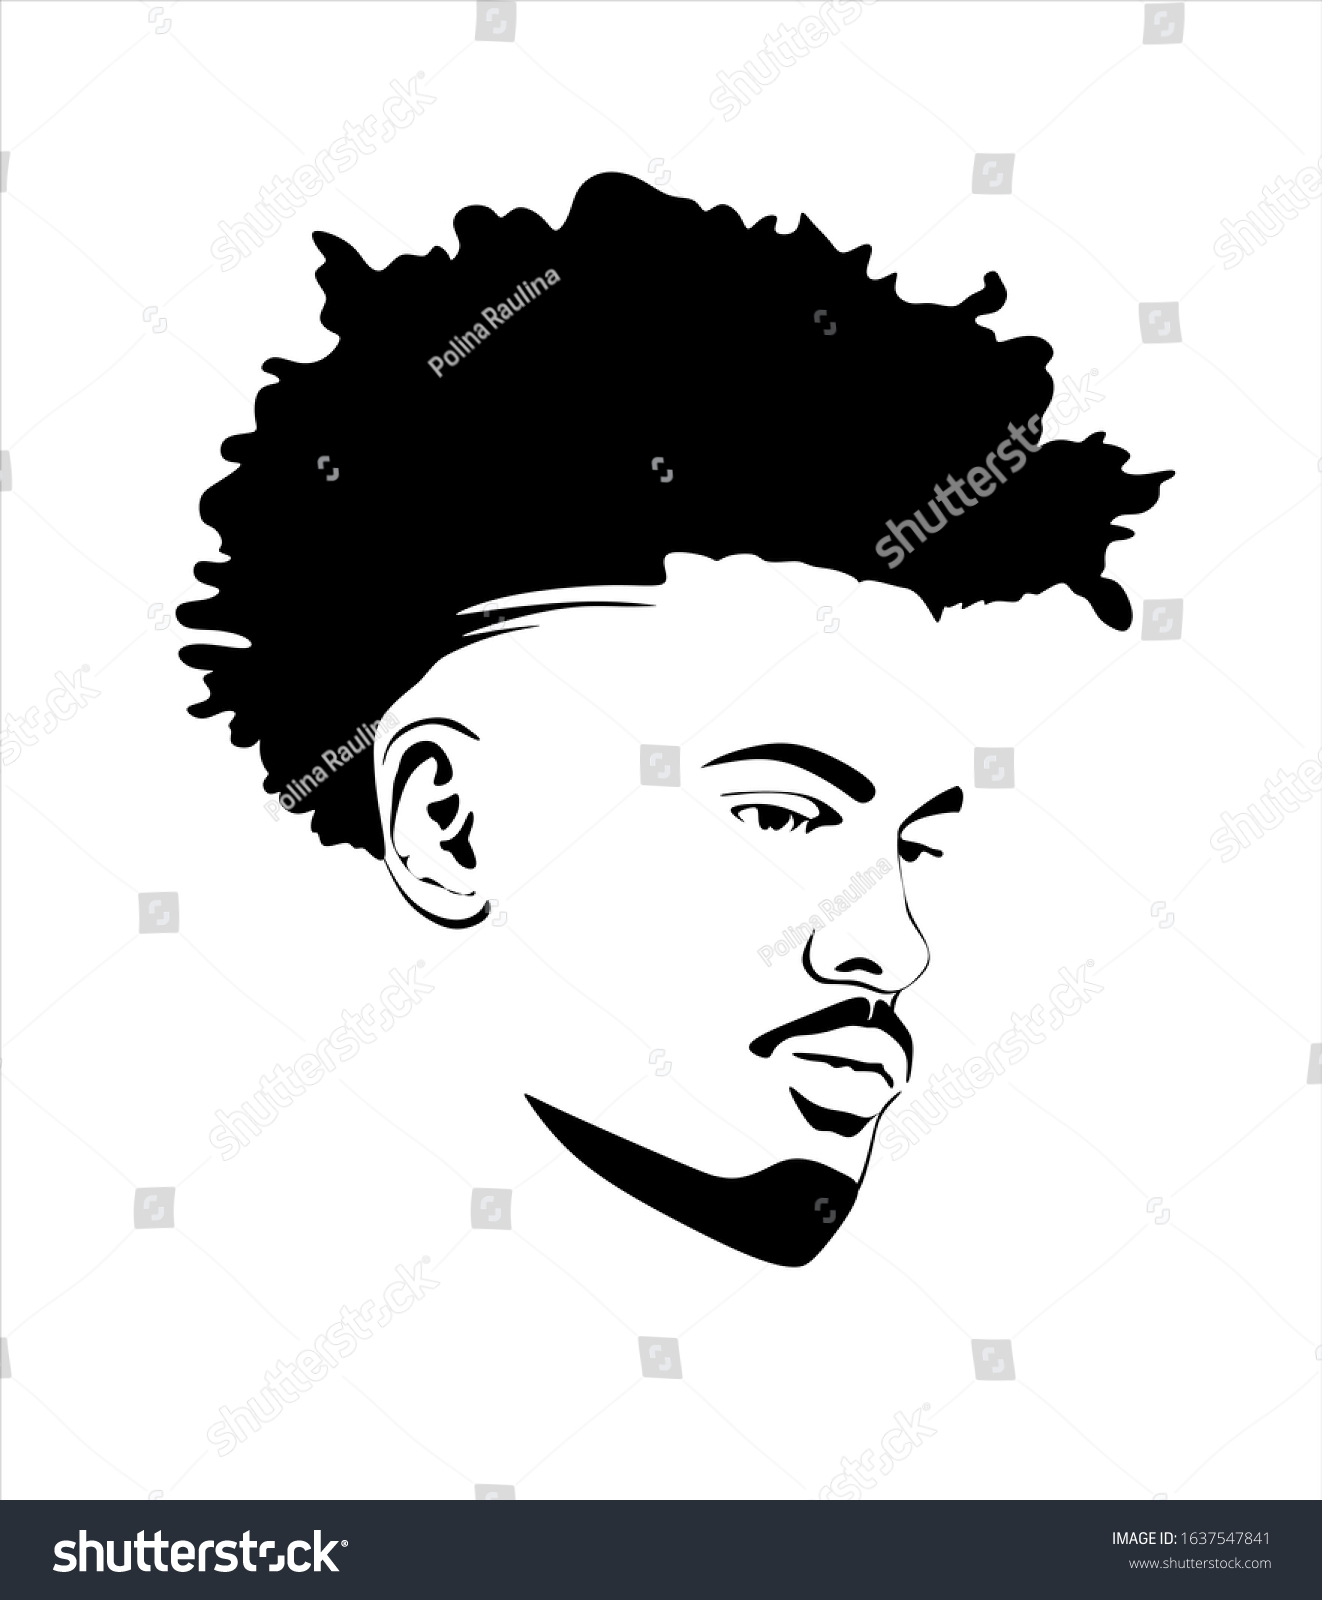 SVG of Black african american afro male face portrait vector silhouette with curls hair style.Man head silhouette isolated on white background. svg